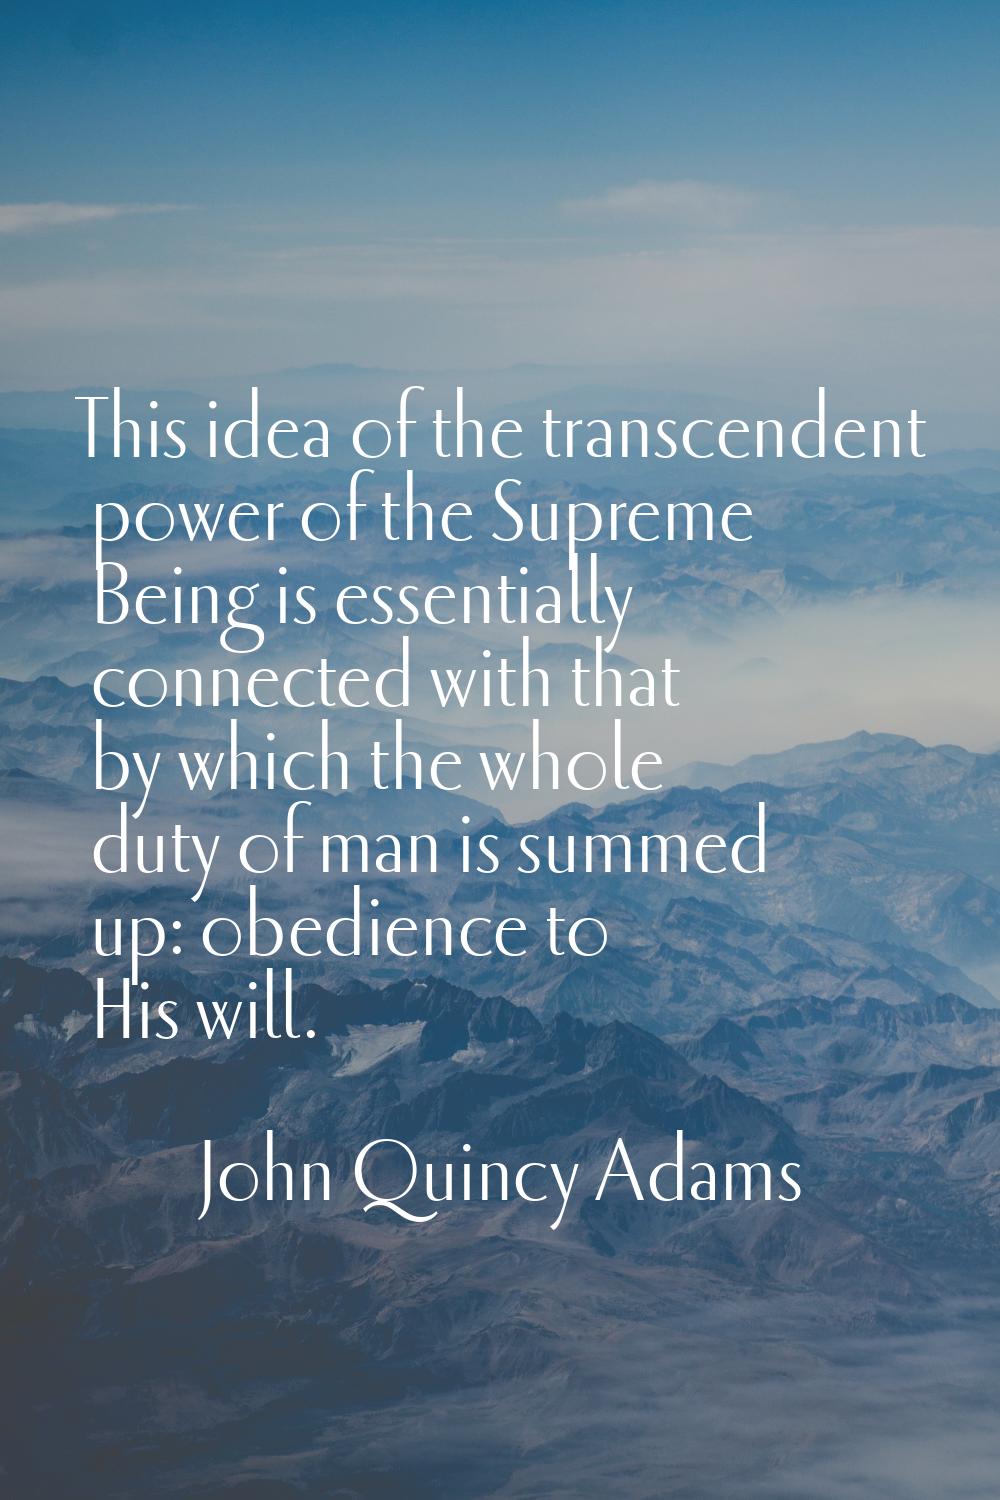 This idea of the transcendent power of the Supreme Being is essentially connected with that by whic